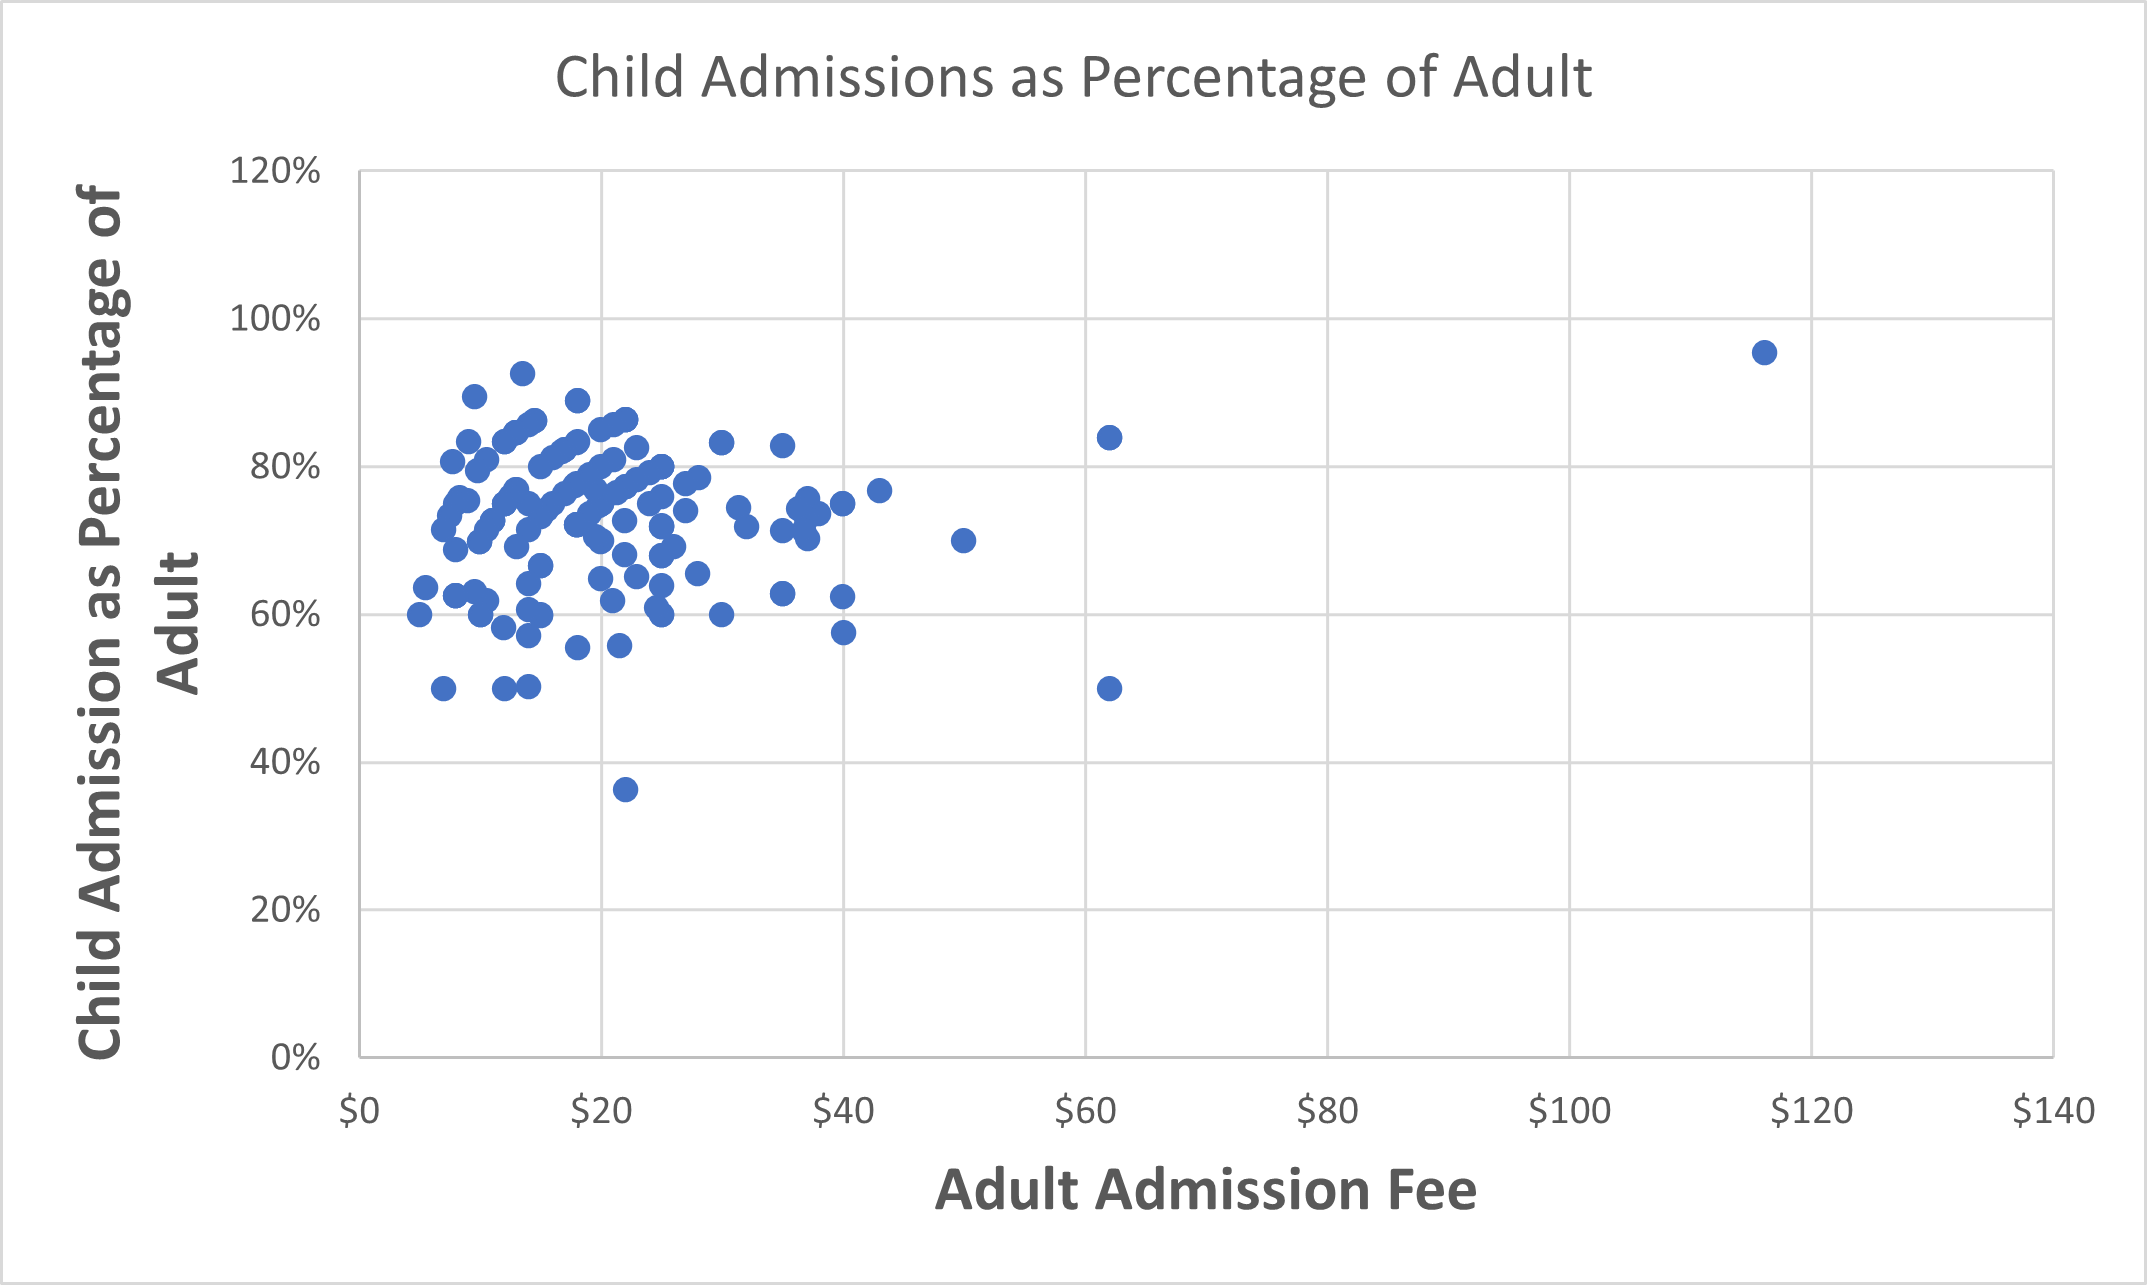 Child Admissions as Percentage of Adult